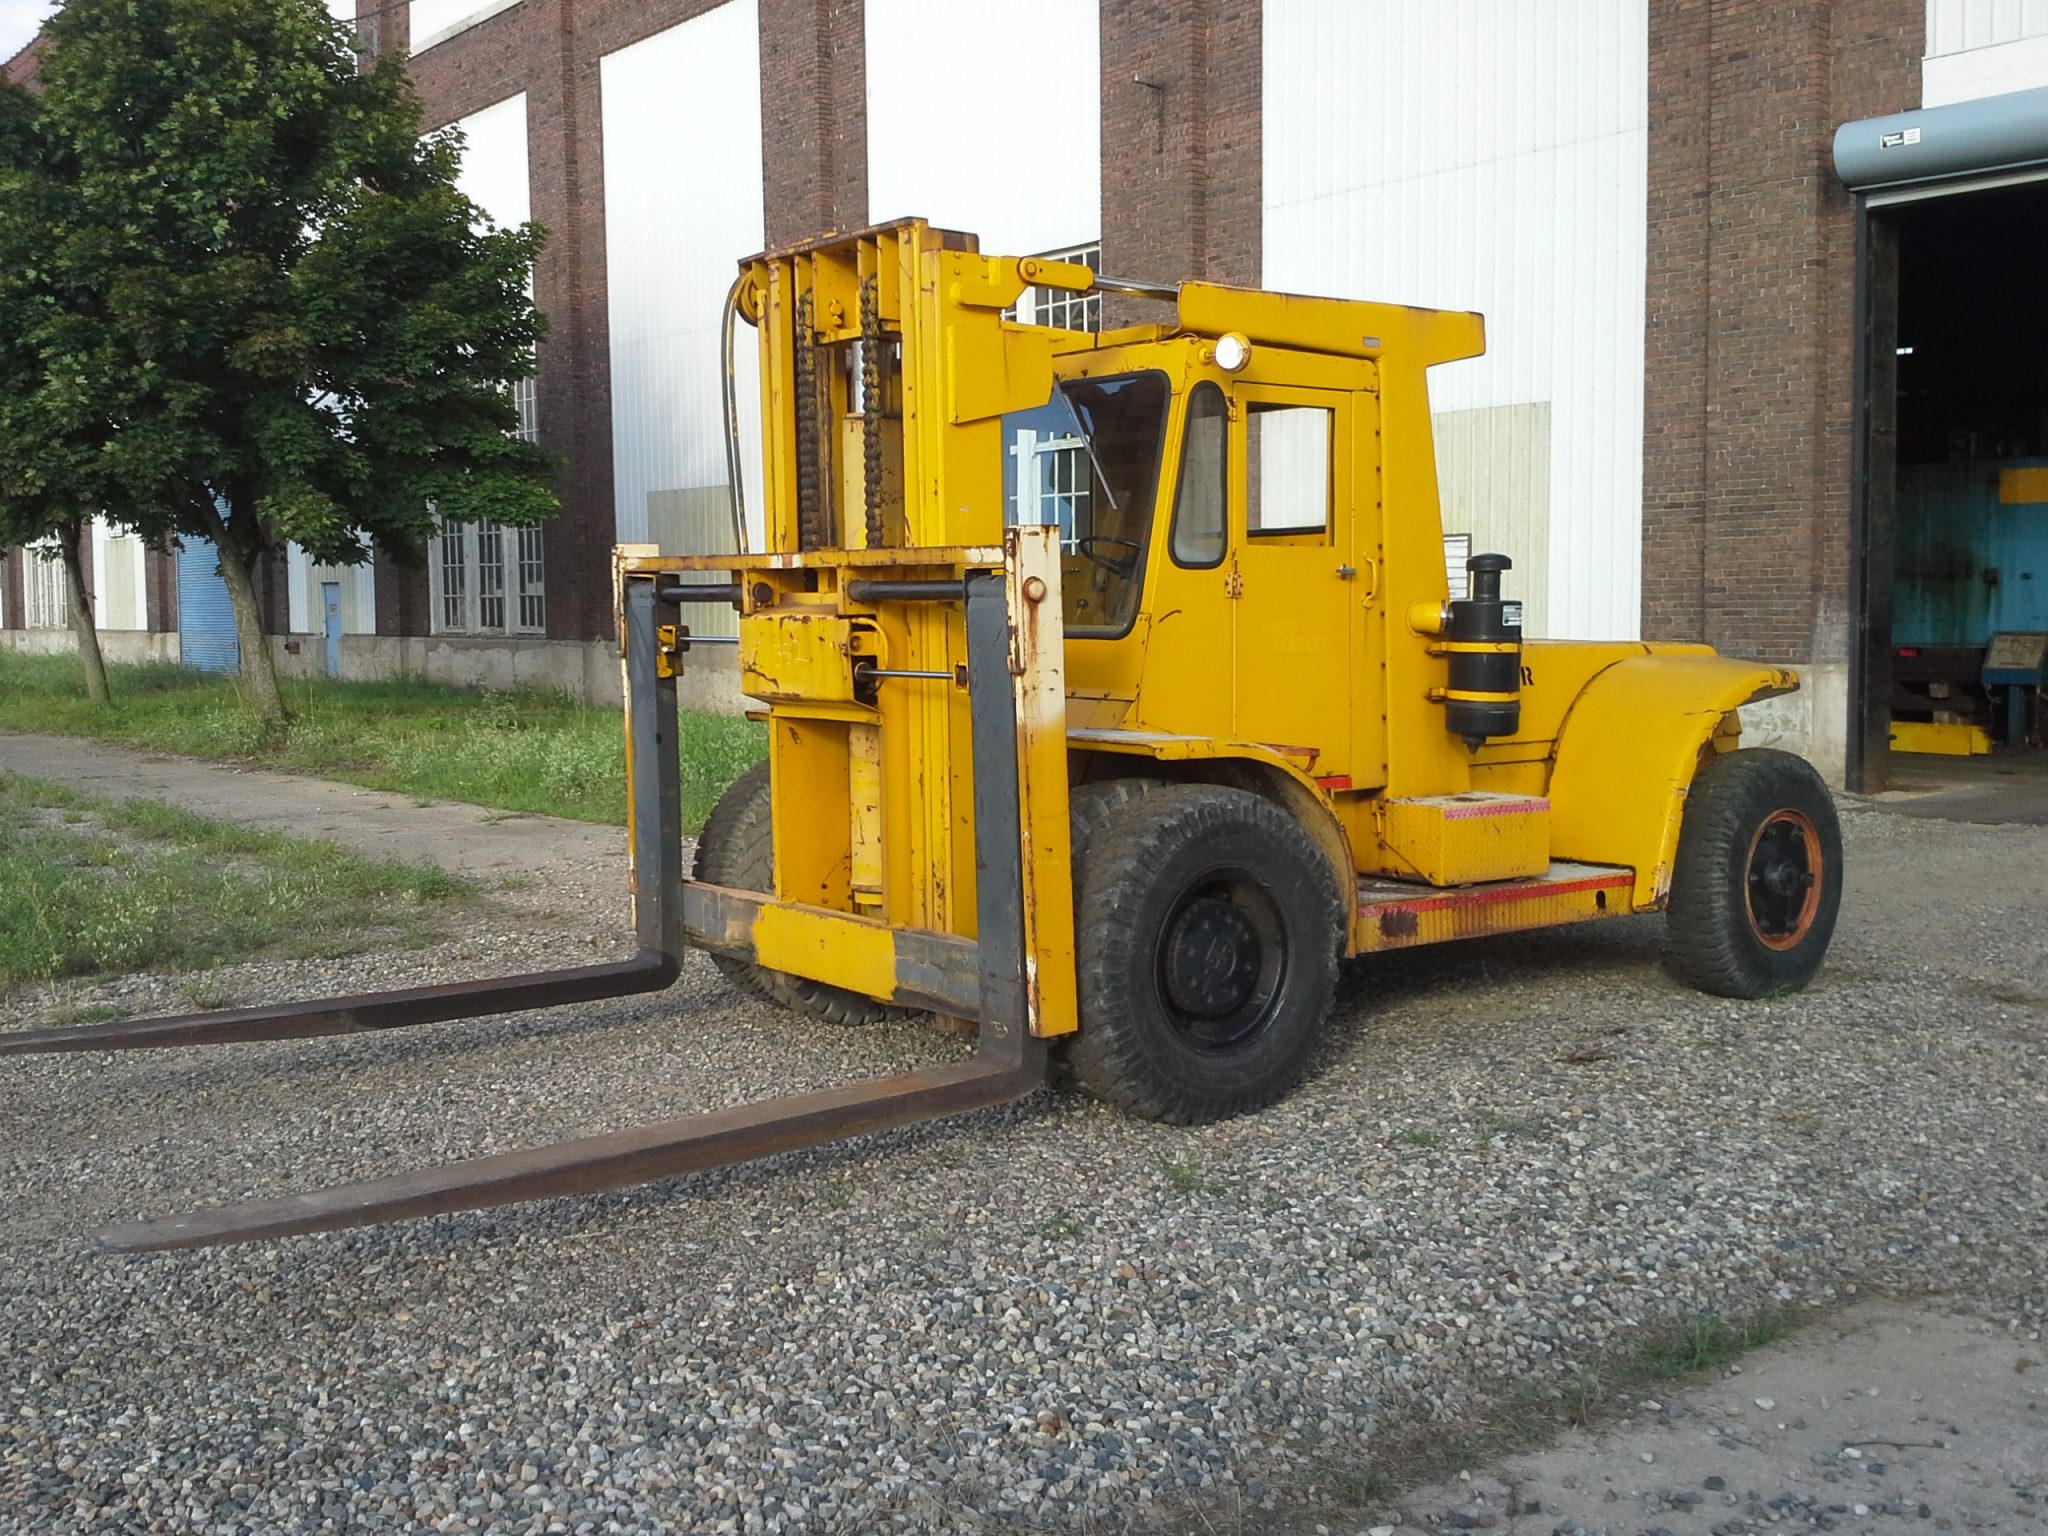 30 000lb Hyster Forklift For Sale Call 616 200 4308affordable Machinery